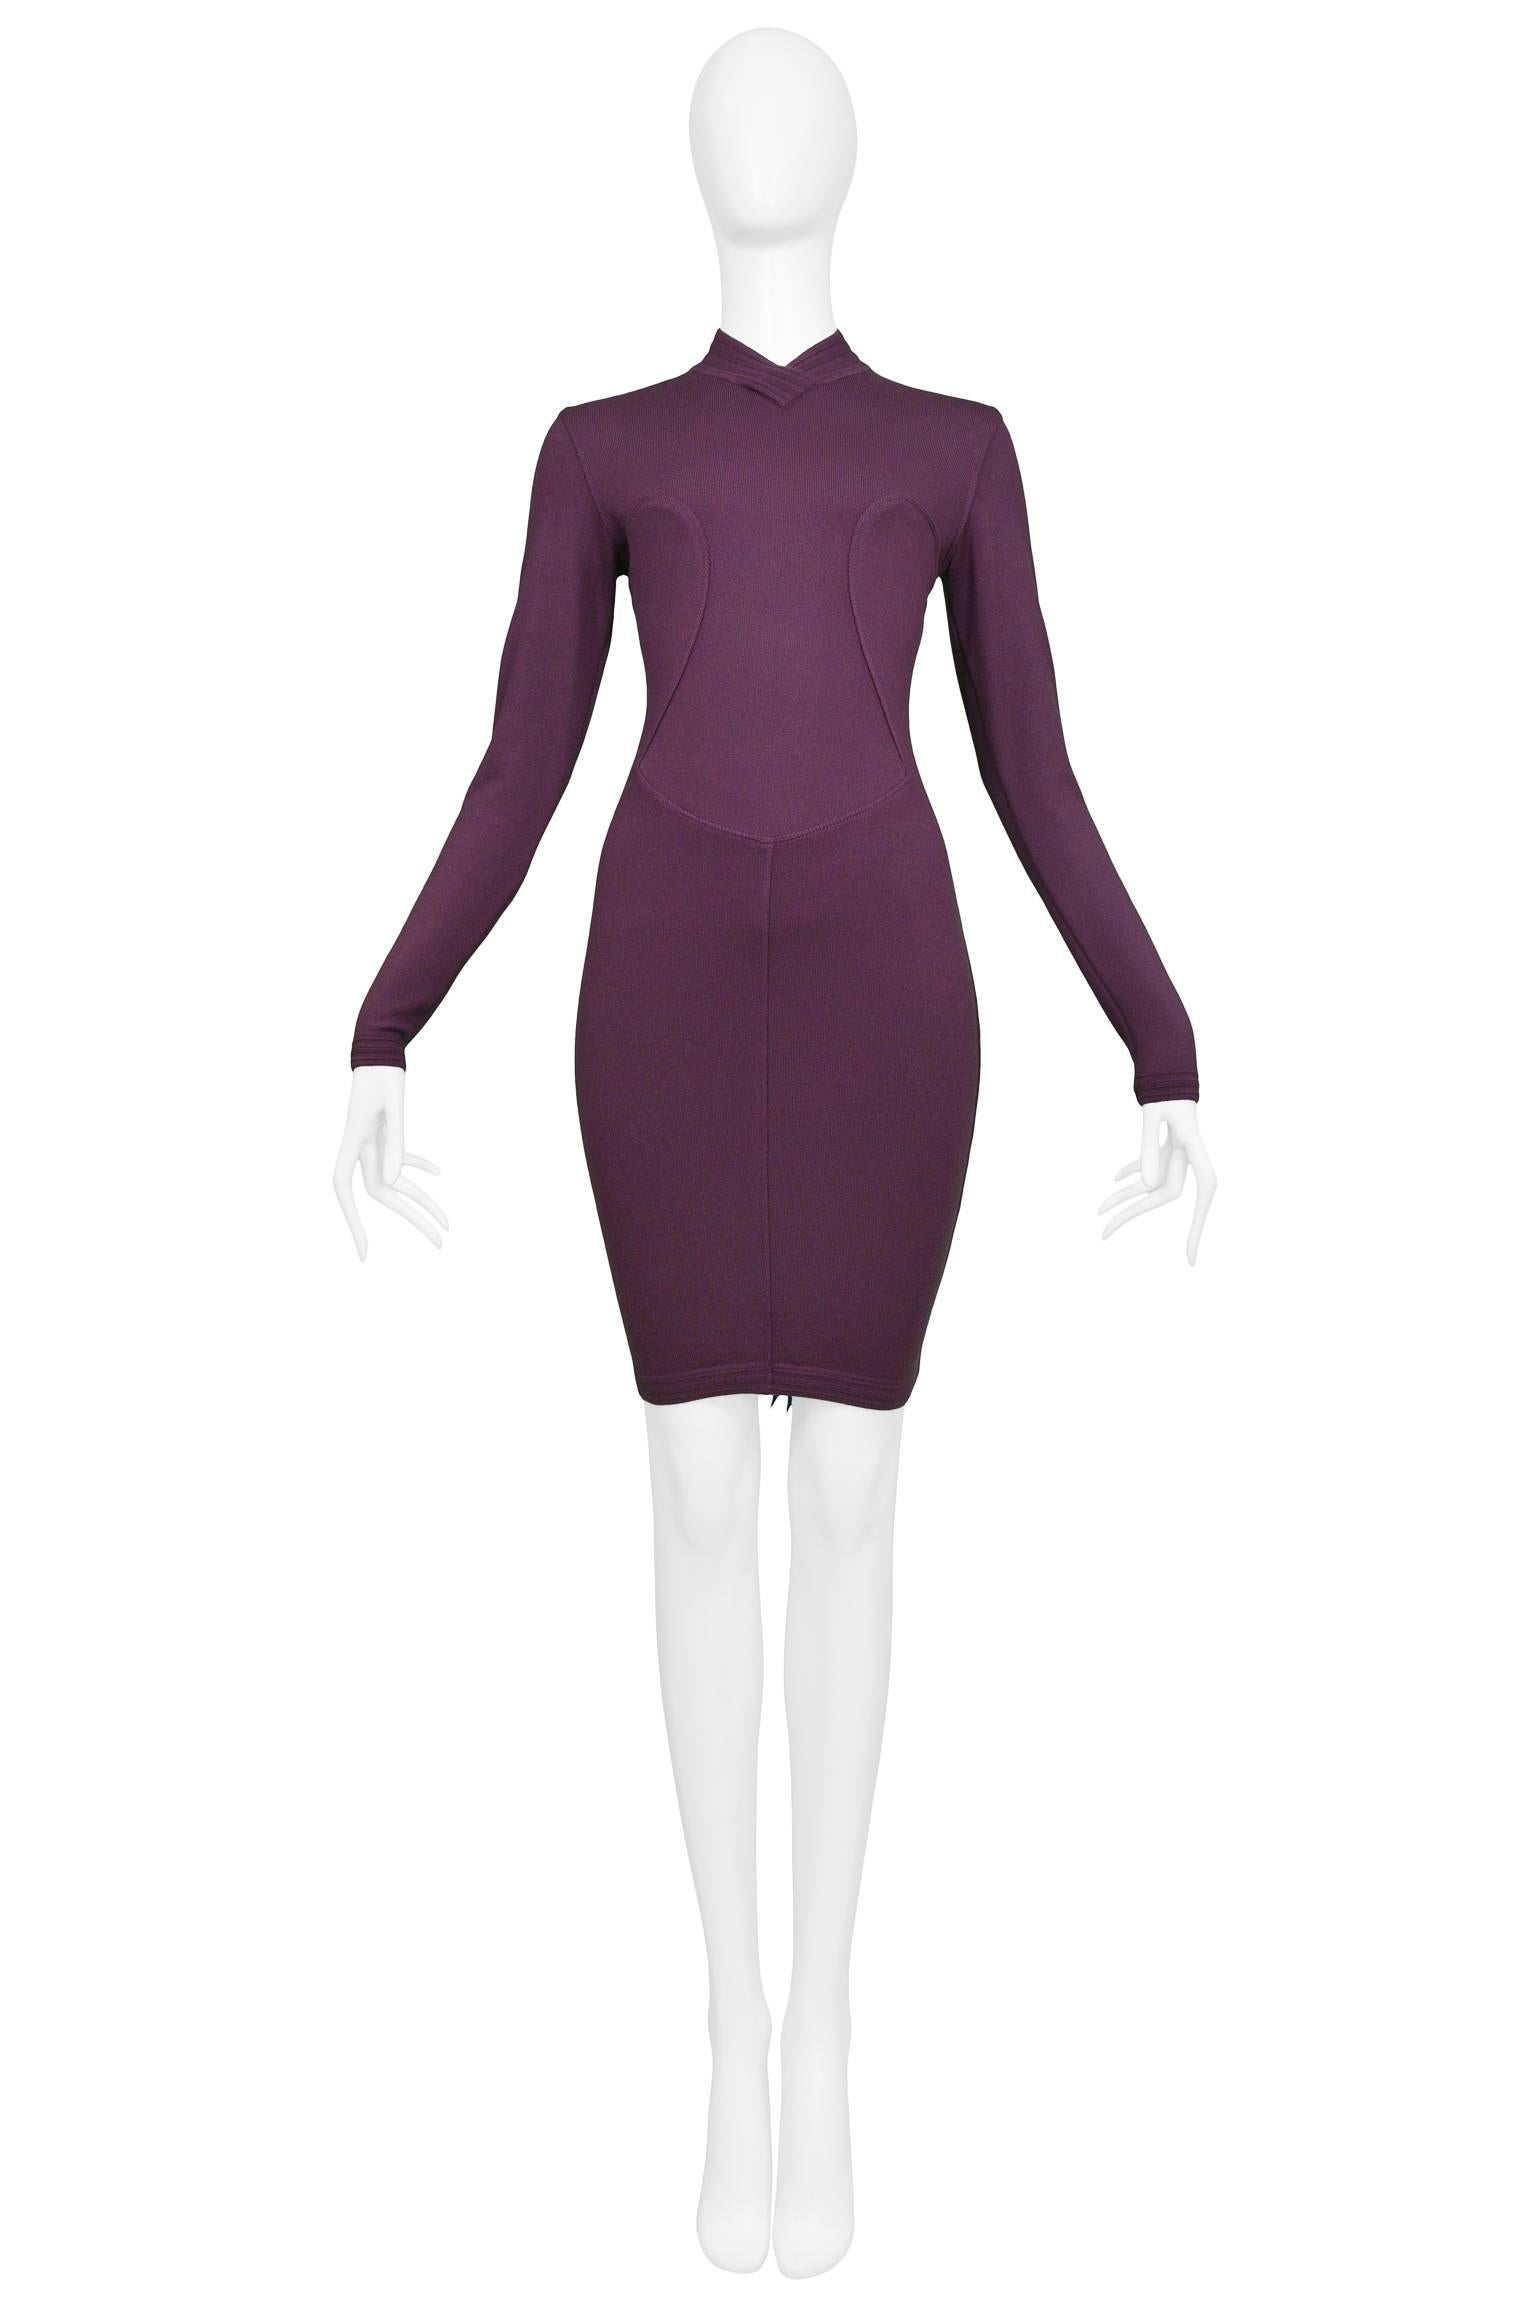 Resurrection Vintage is excited to offer a vintage Azzedine Alaia purple long sleeve body-con dress featuring a high collar neck, curved seams on the bodice, a fitted skirt and a center back zipper. 

Alaia Label
Size Medium
Measurements: (flat